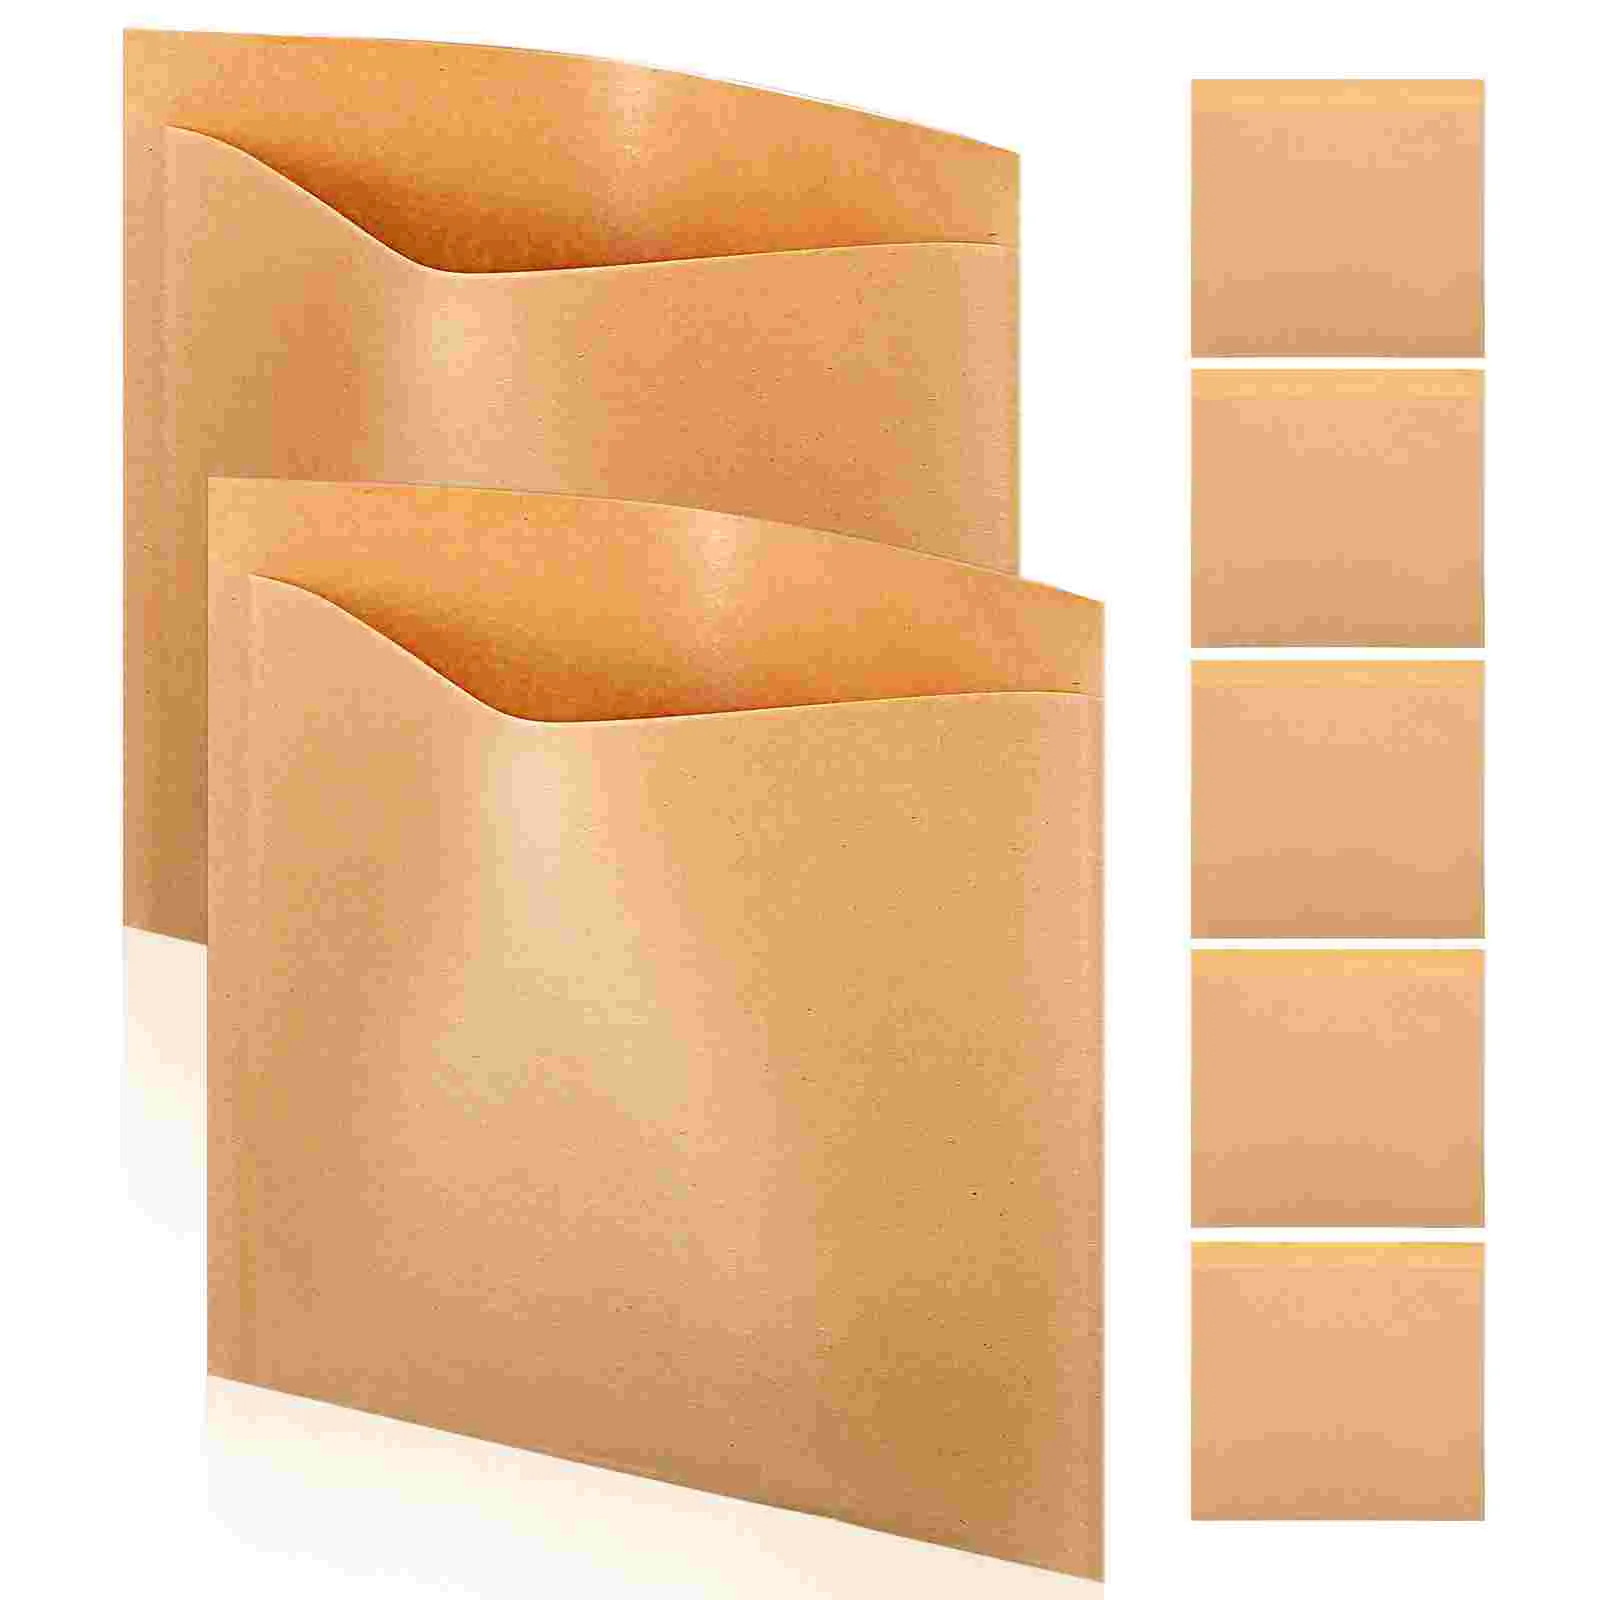 

200 Pcs Brown Paper Gift Bags Greaseproof Oil Food Kraft Sandwich Grease- Resistant Treat Party Favor